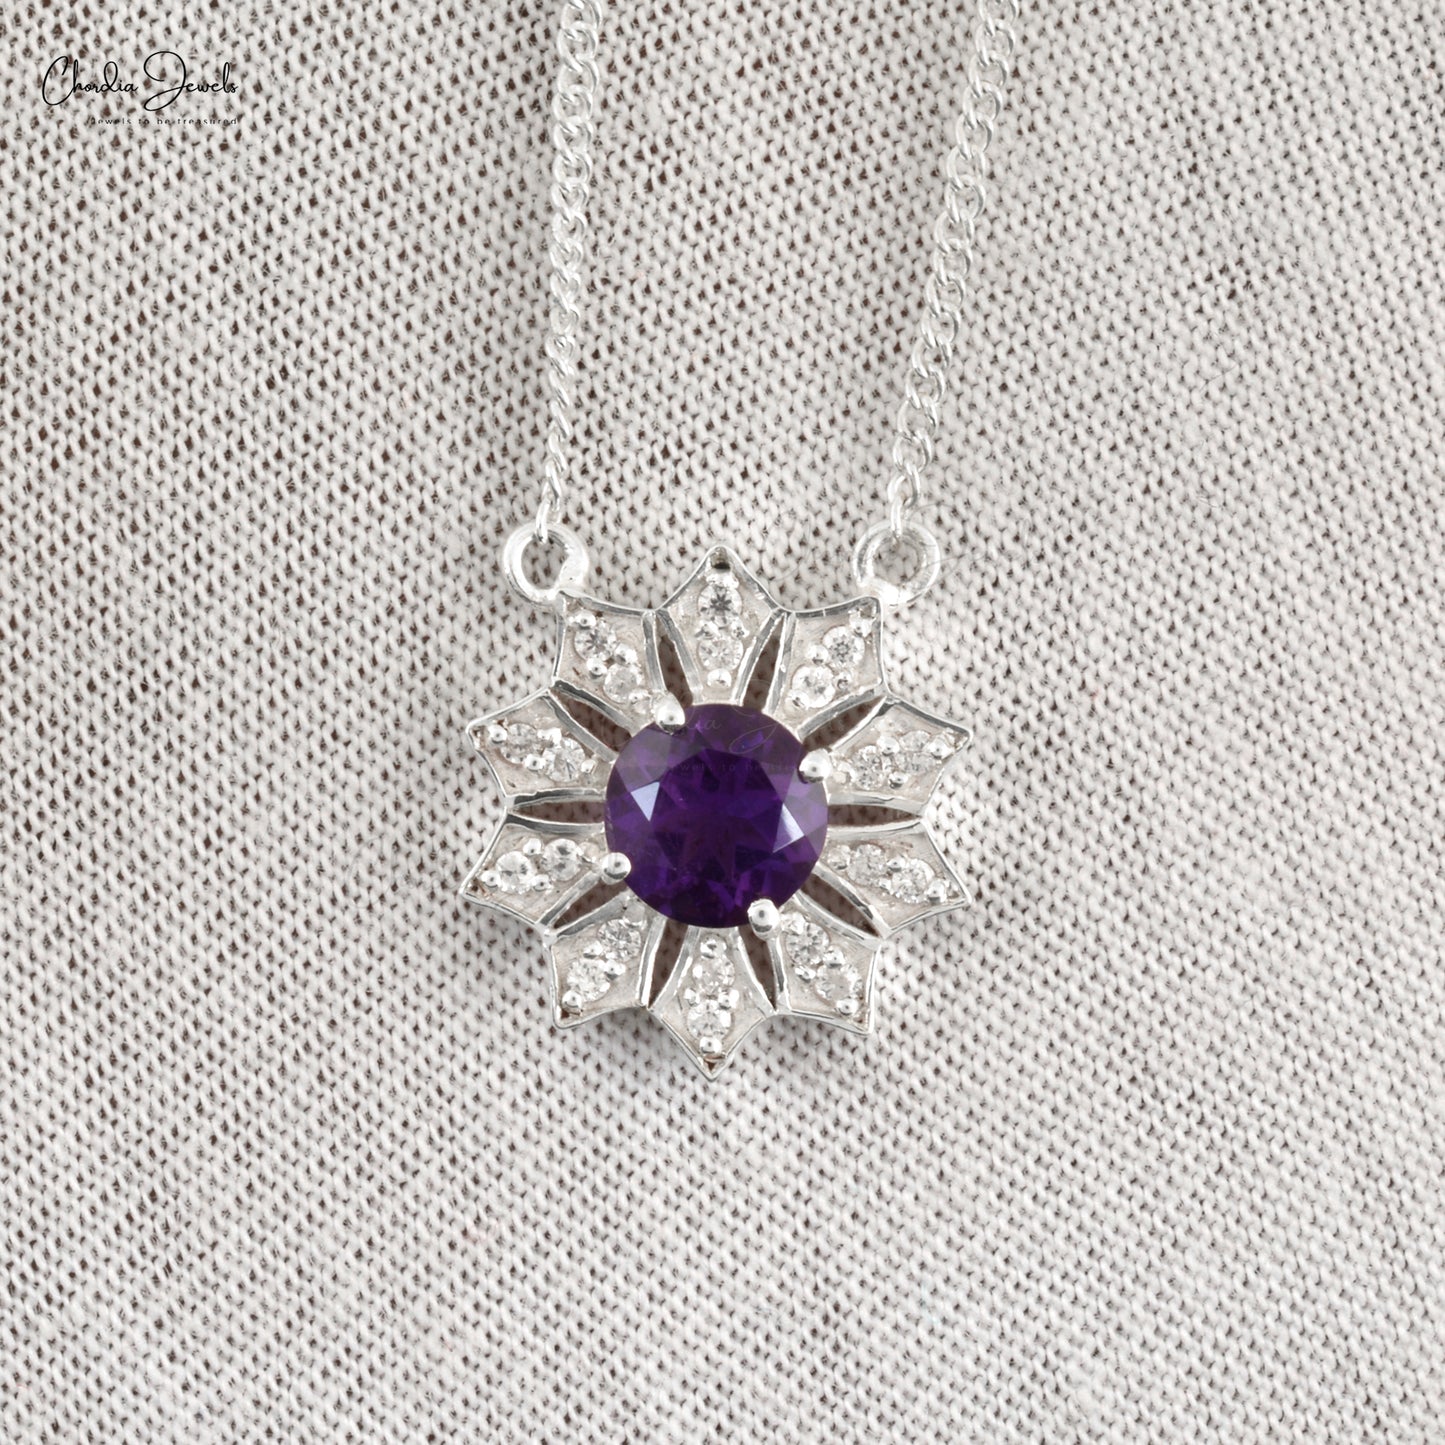 Load image into Gallery viewer, Natural Amethyst Flower Necklace 925 Sterling Silver Cubic Zircon Fashion Jewelry February Birthstone Necklace At Wholesale Price
